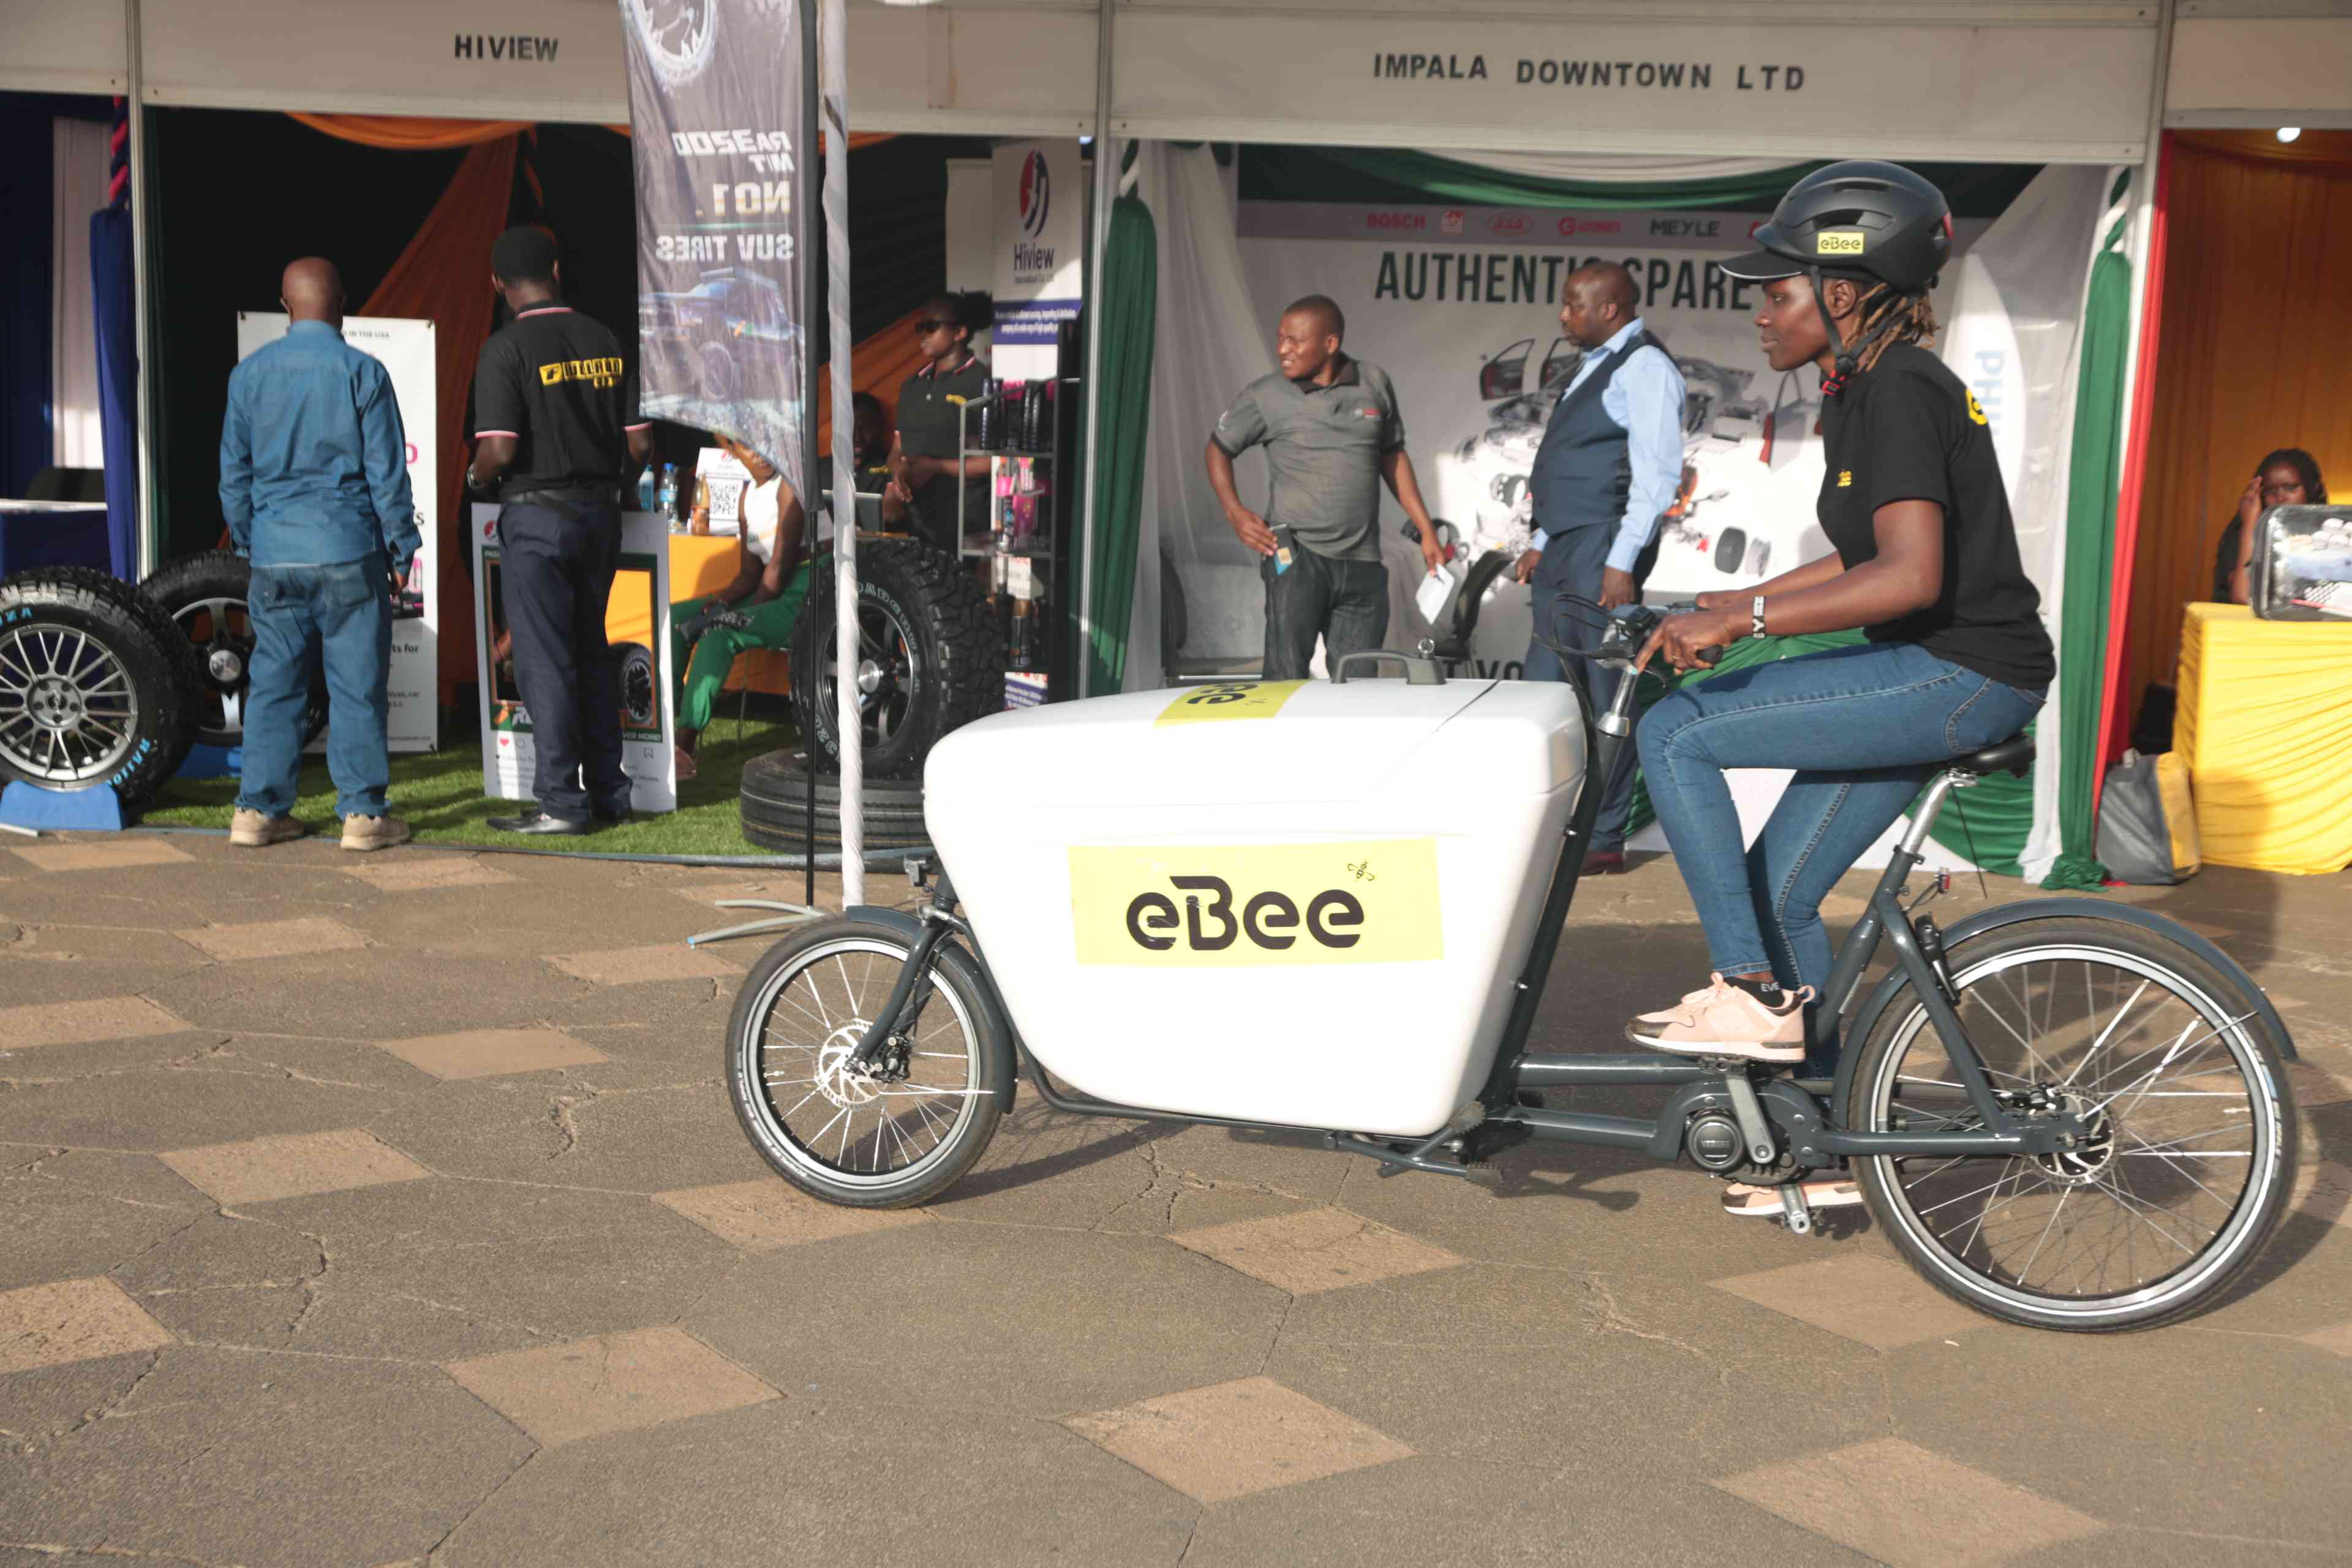 A motor show visitor testing out the ebee e-bikes